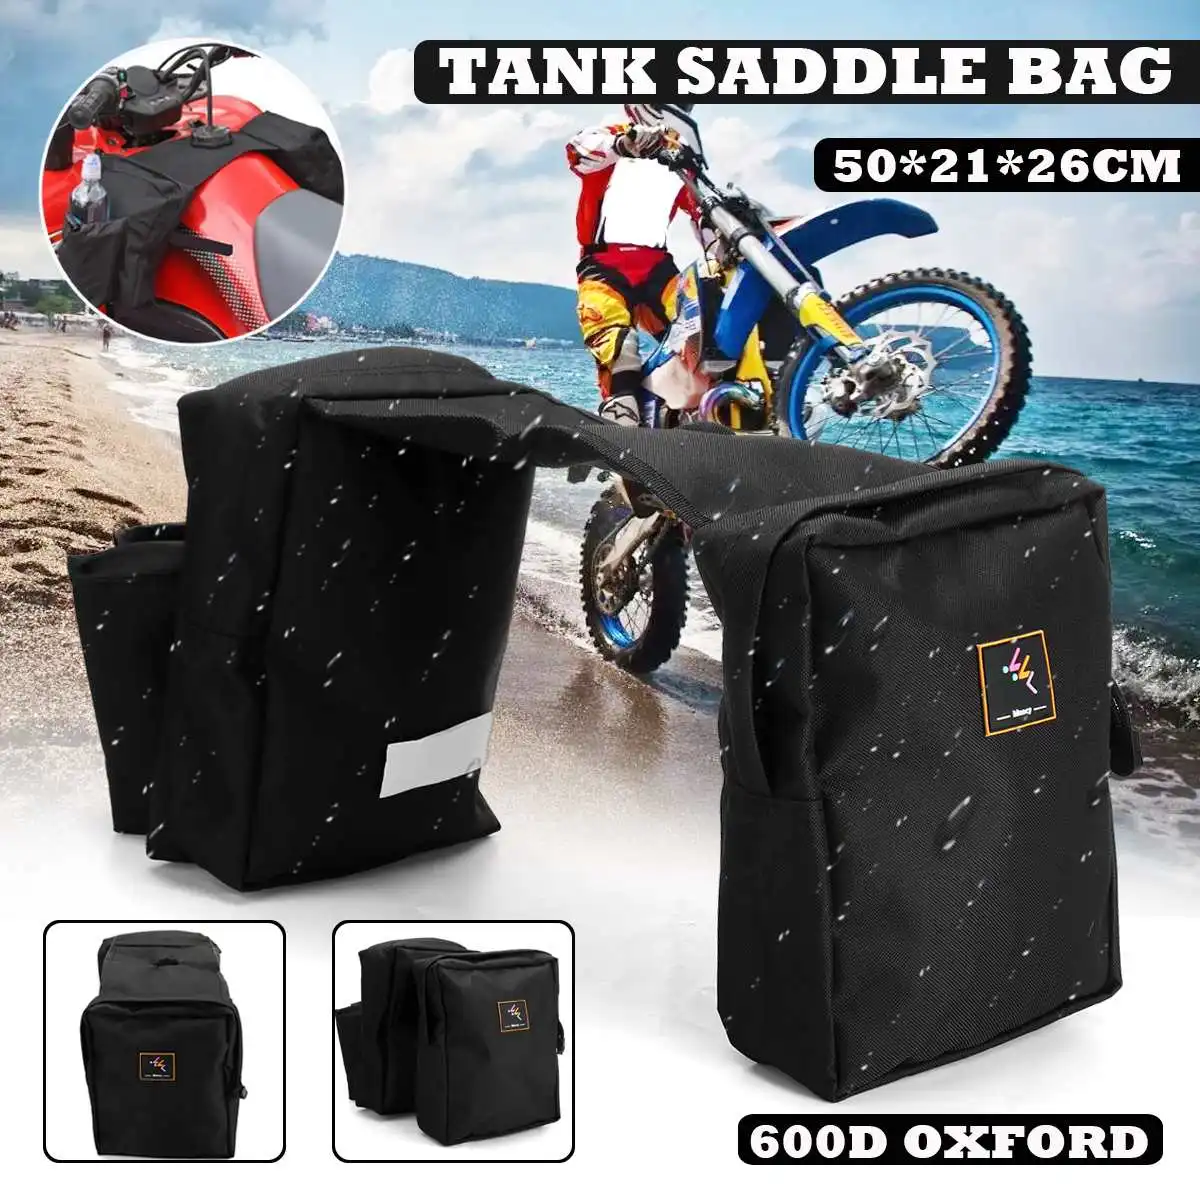 Prom-note Universal Motorcycles Saddlebags 600D Waterproof Oxford Cloth ATV Saddle Bag Tank Top Saddle Bag ATV Accessories,1 Pair Motorcycle Side Saddlebags Waterproof Fuel Tank Cup Saddle Bag